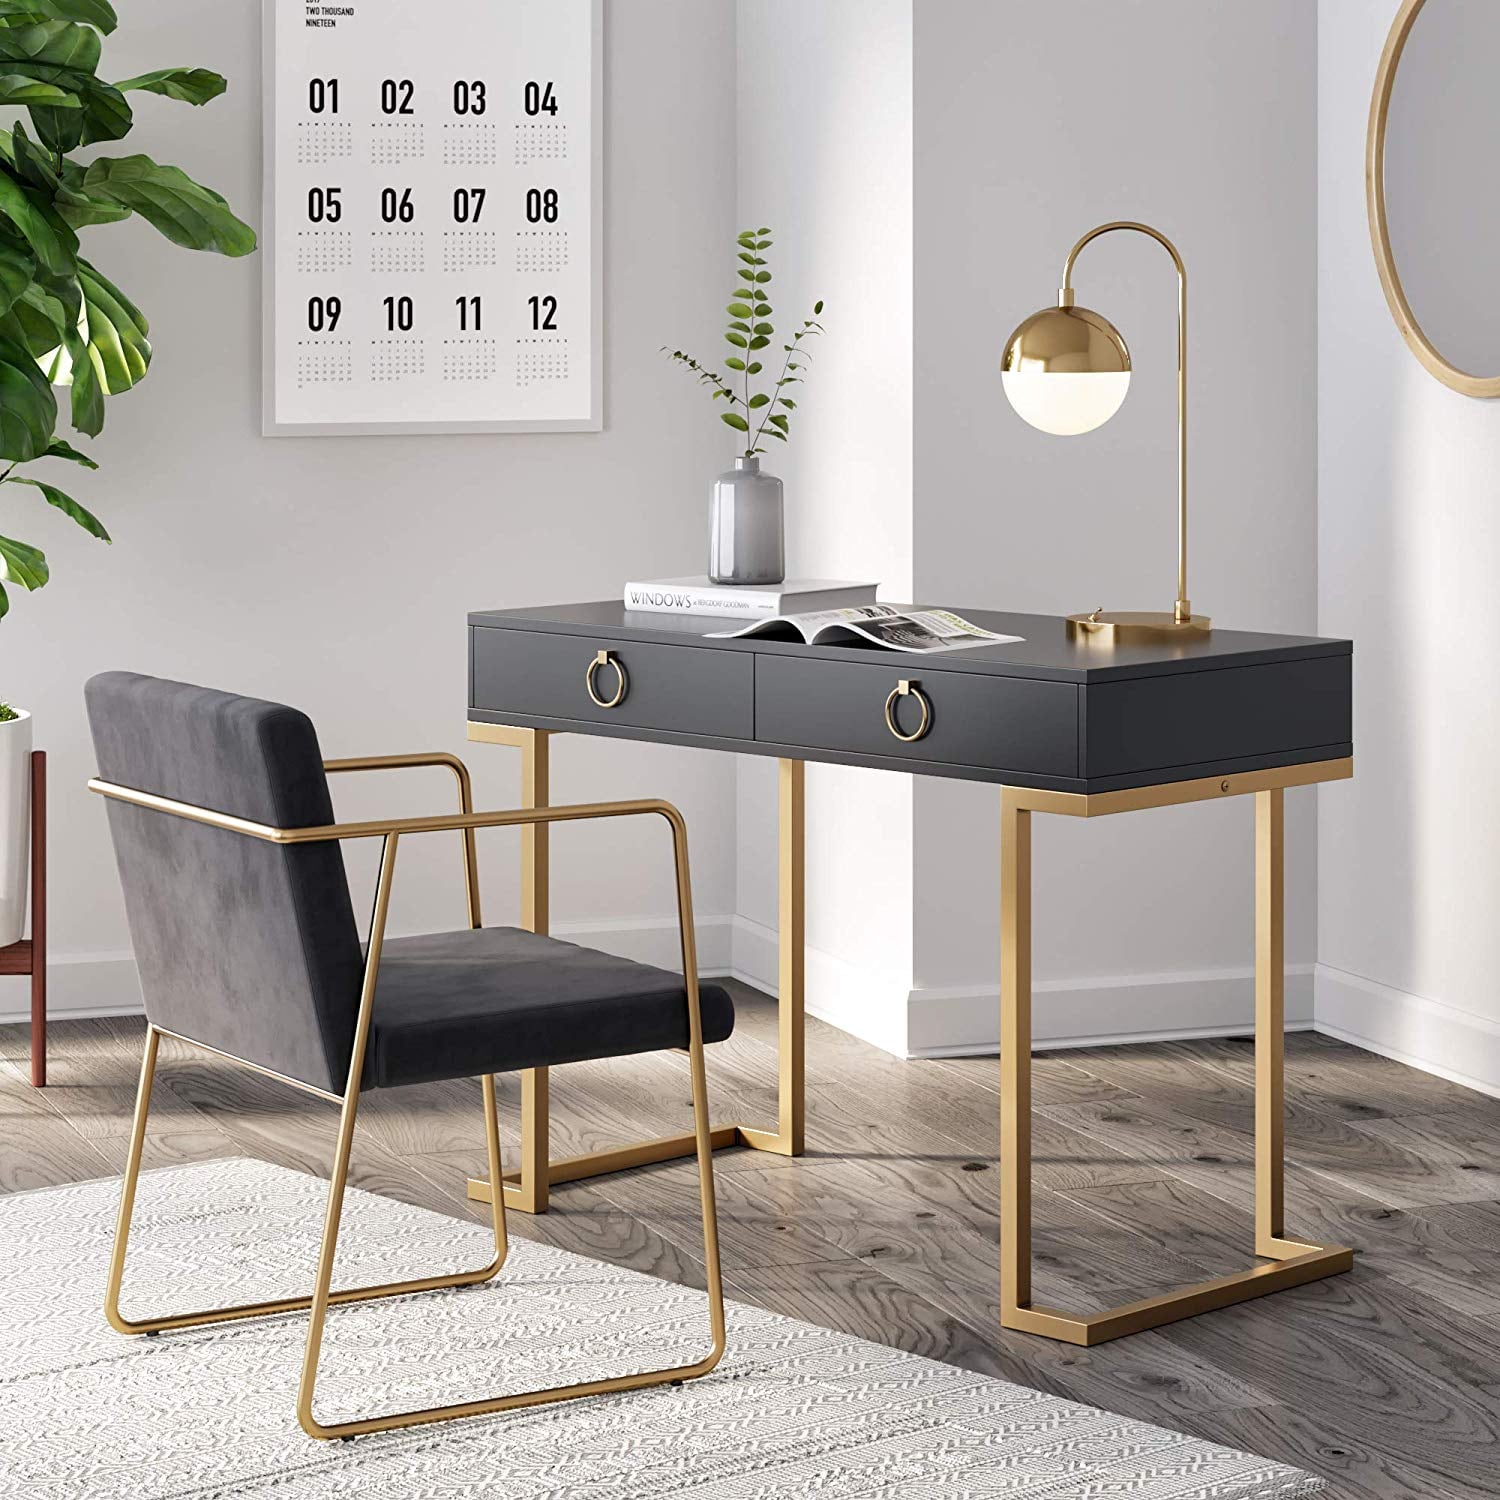 Buy Best Office Table Design For Small Space From Alfa Furniture